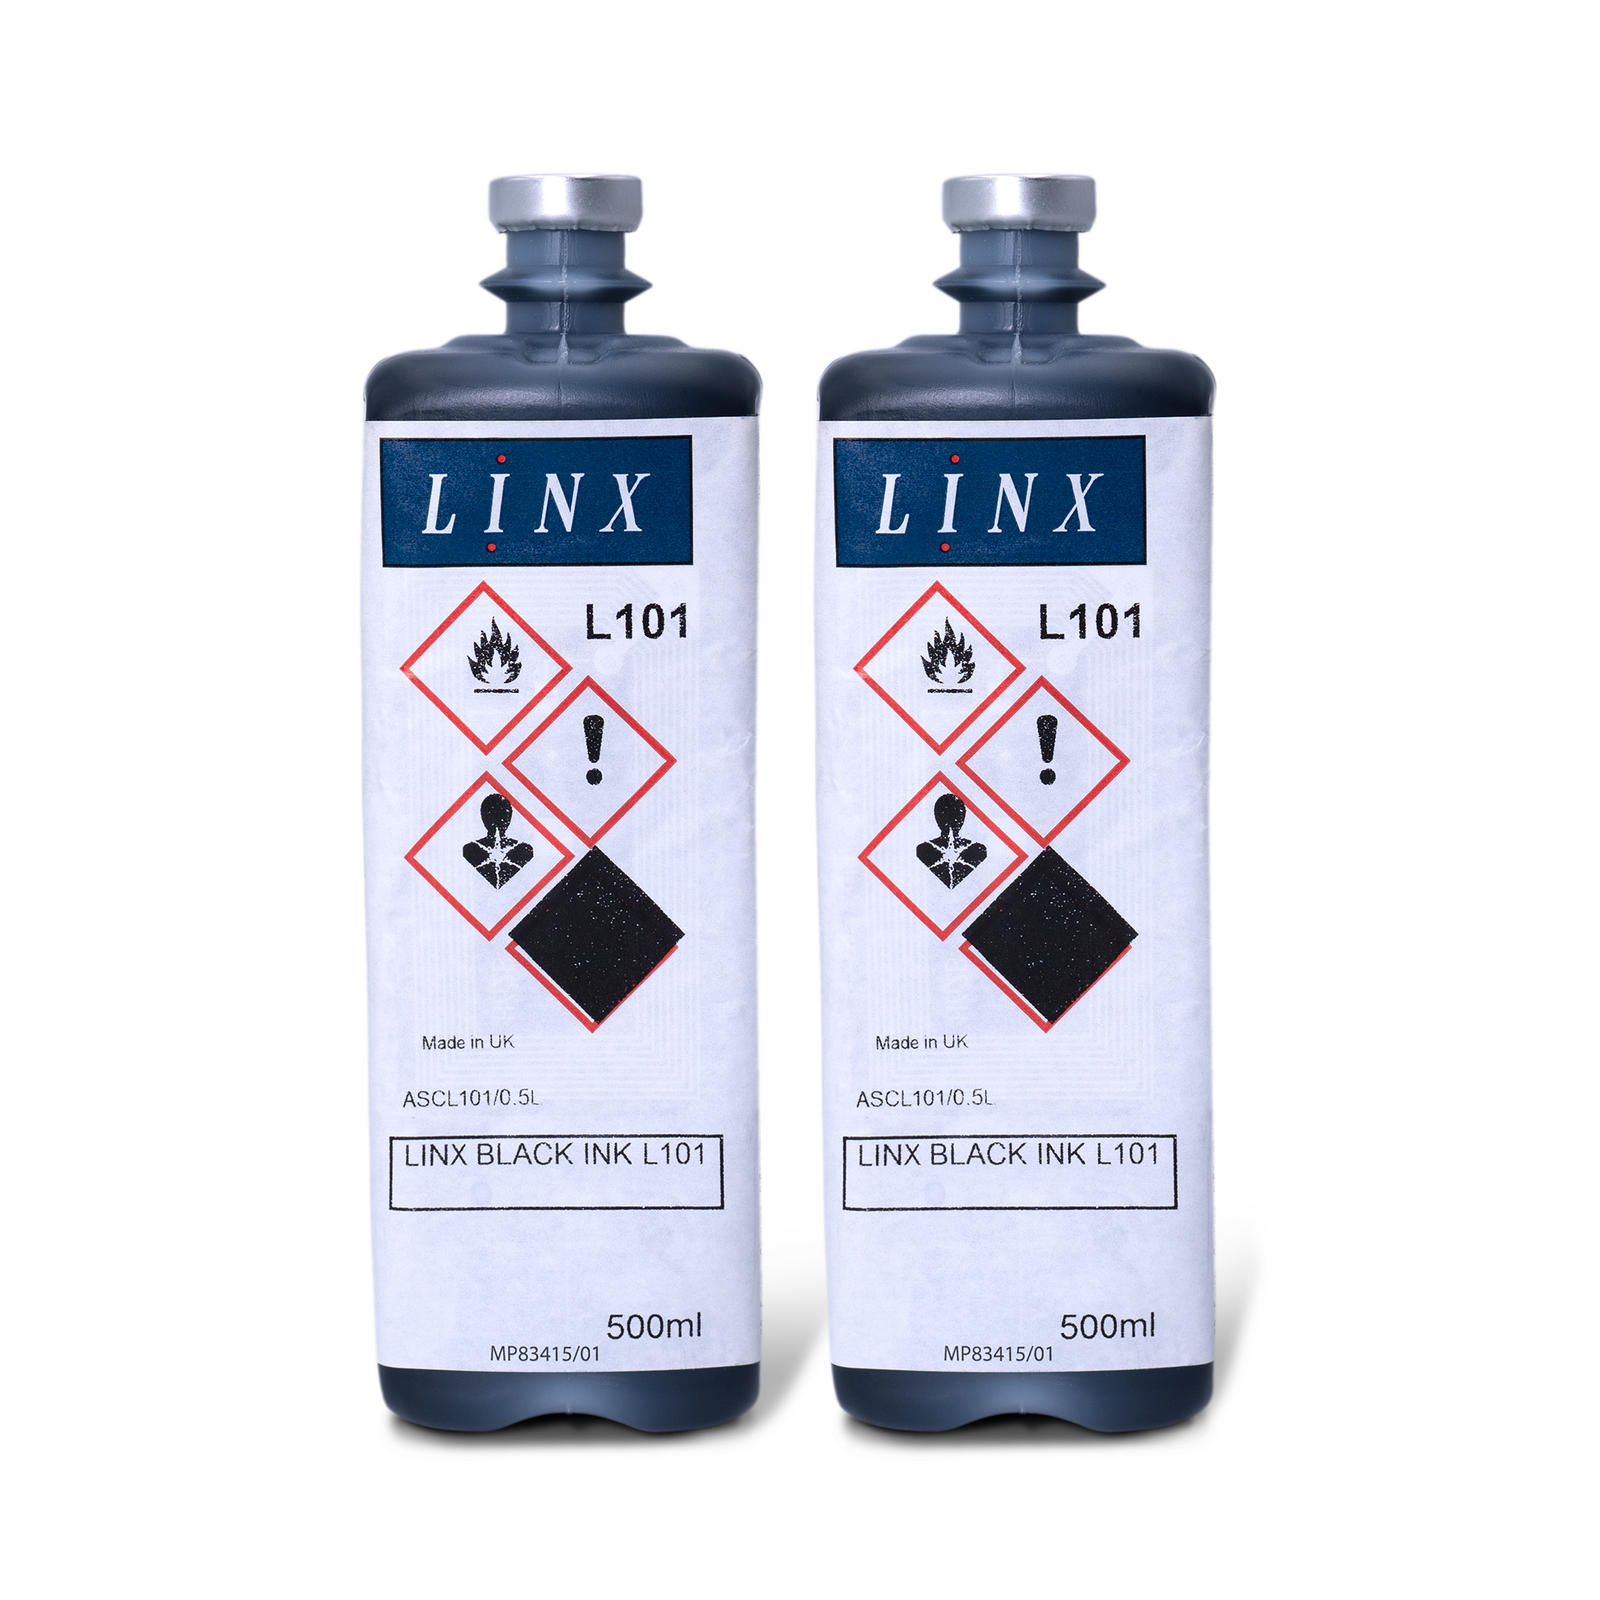 2 reemplazable containers of 500 ml of black LINX multi-purpose ink